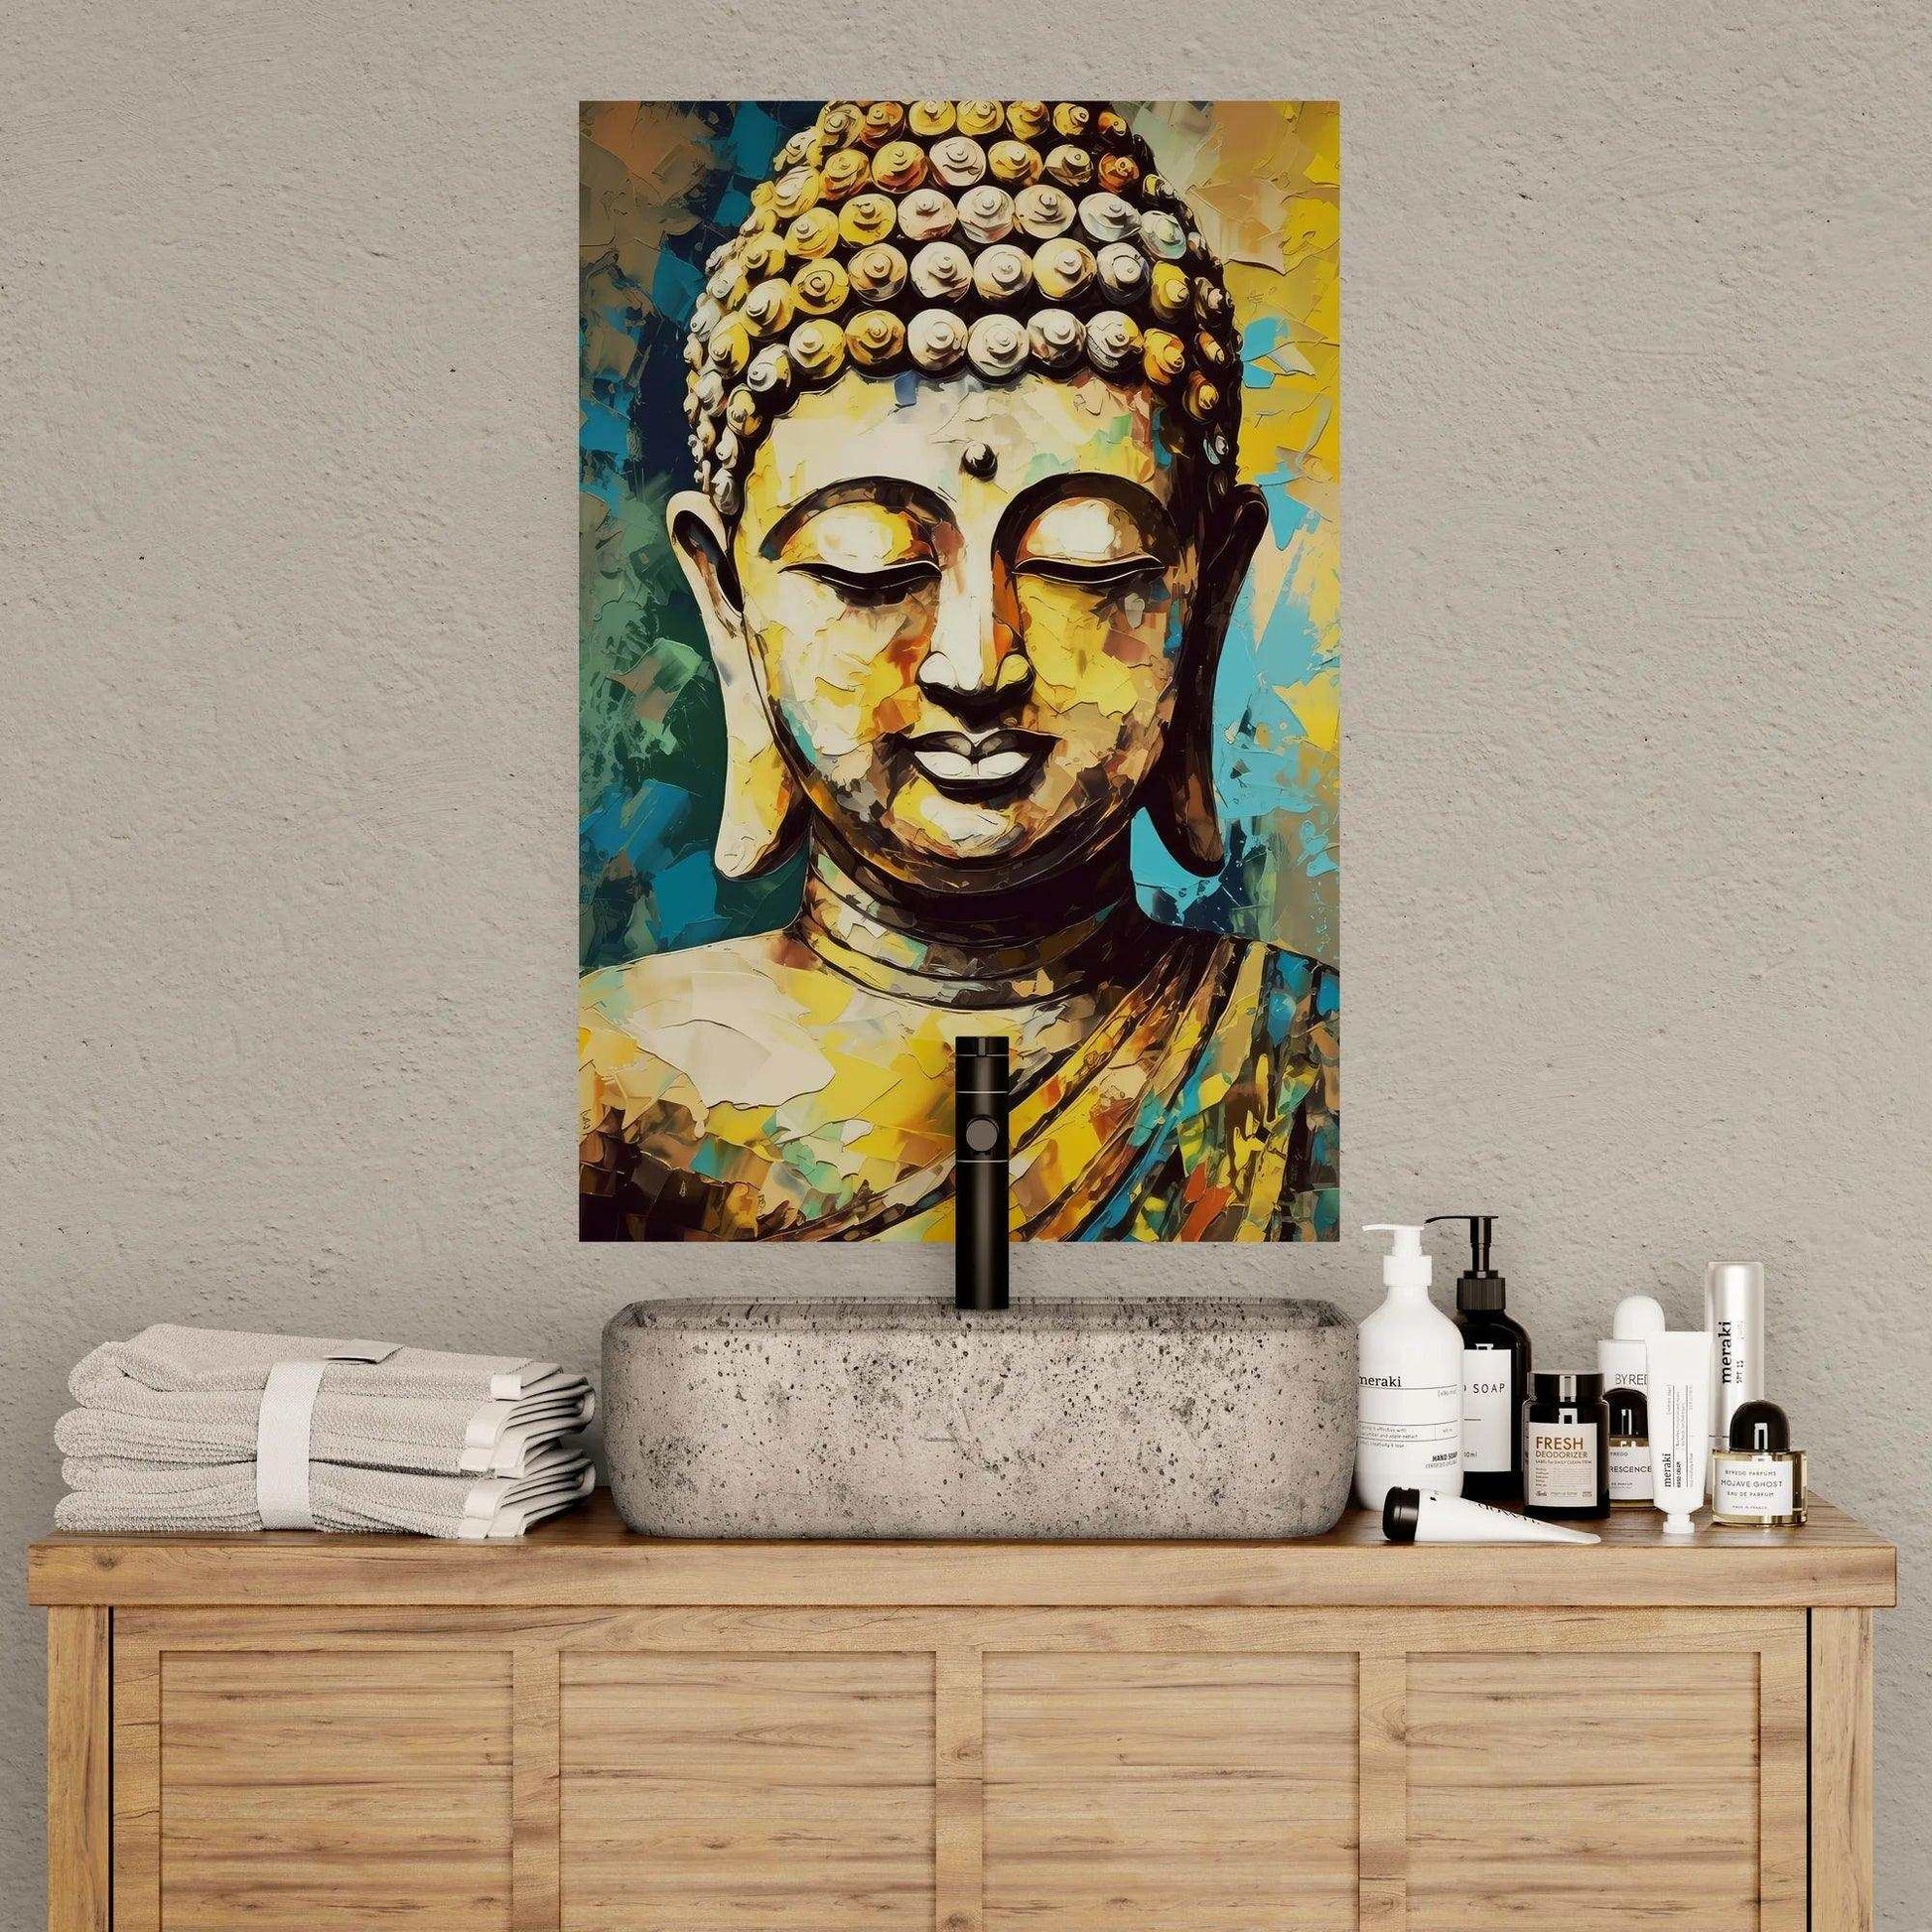 A vibrant Buddha poster in yellow, gold, and aqua tones hangs above a modern bathroom sink on a wooden vanity with neatly folded towels and a selection of black and white toiletry bottles.